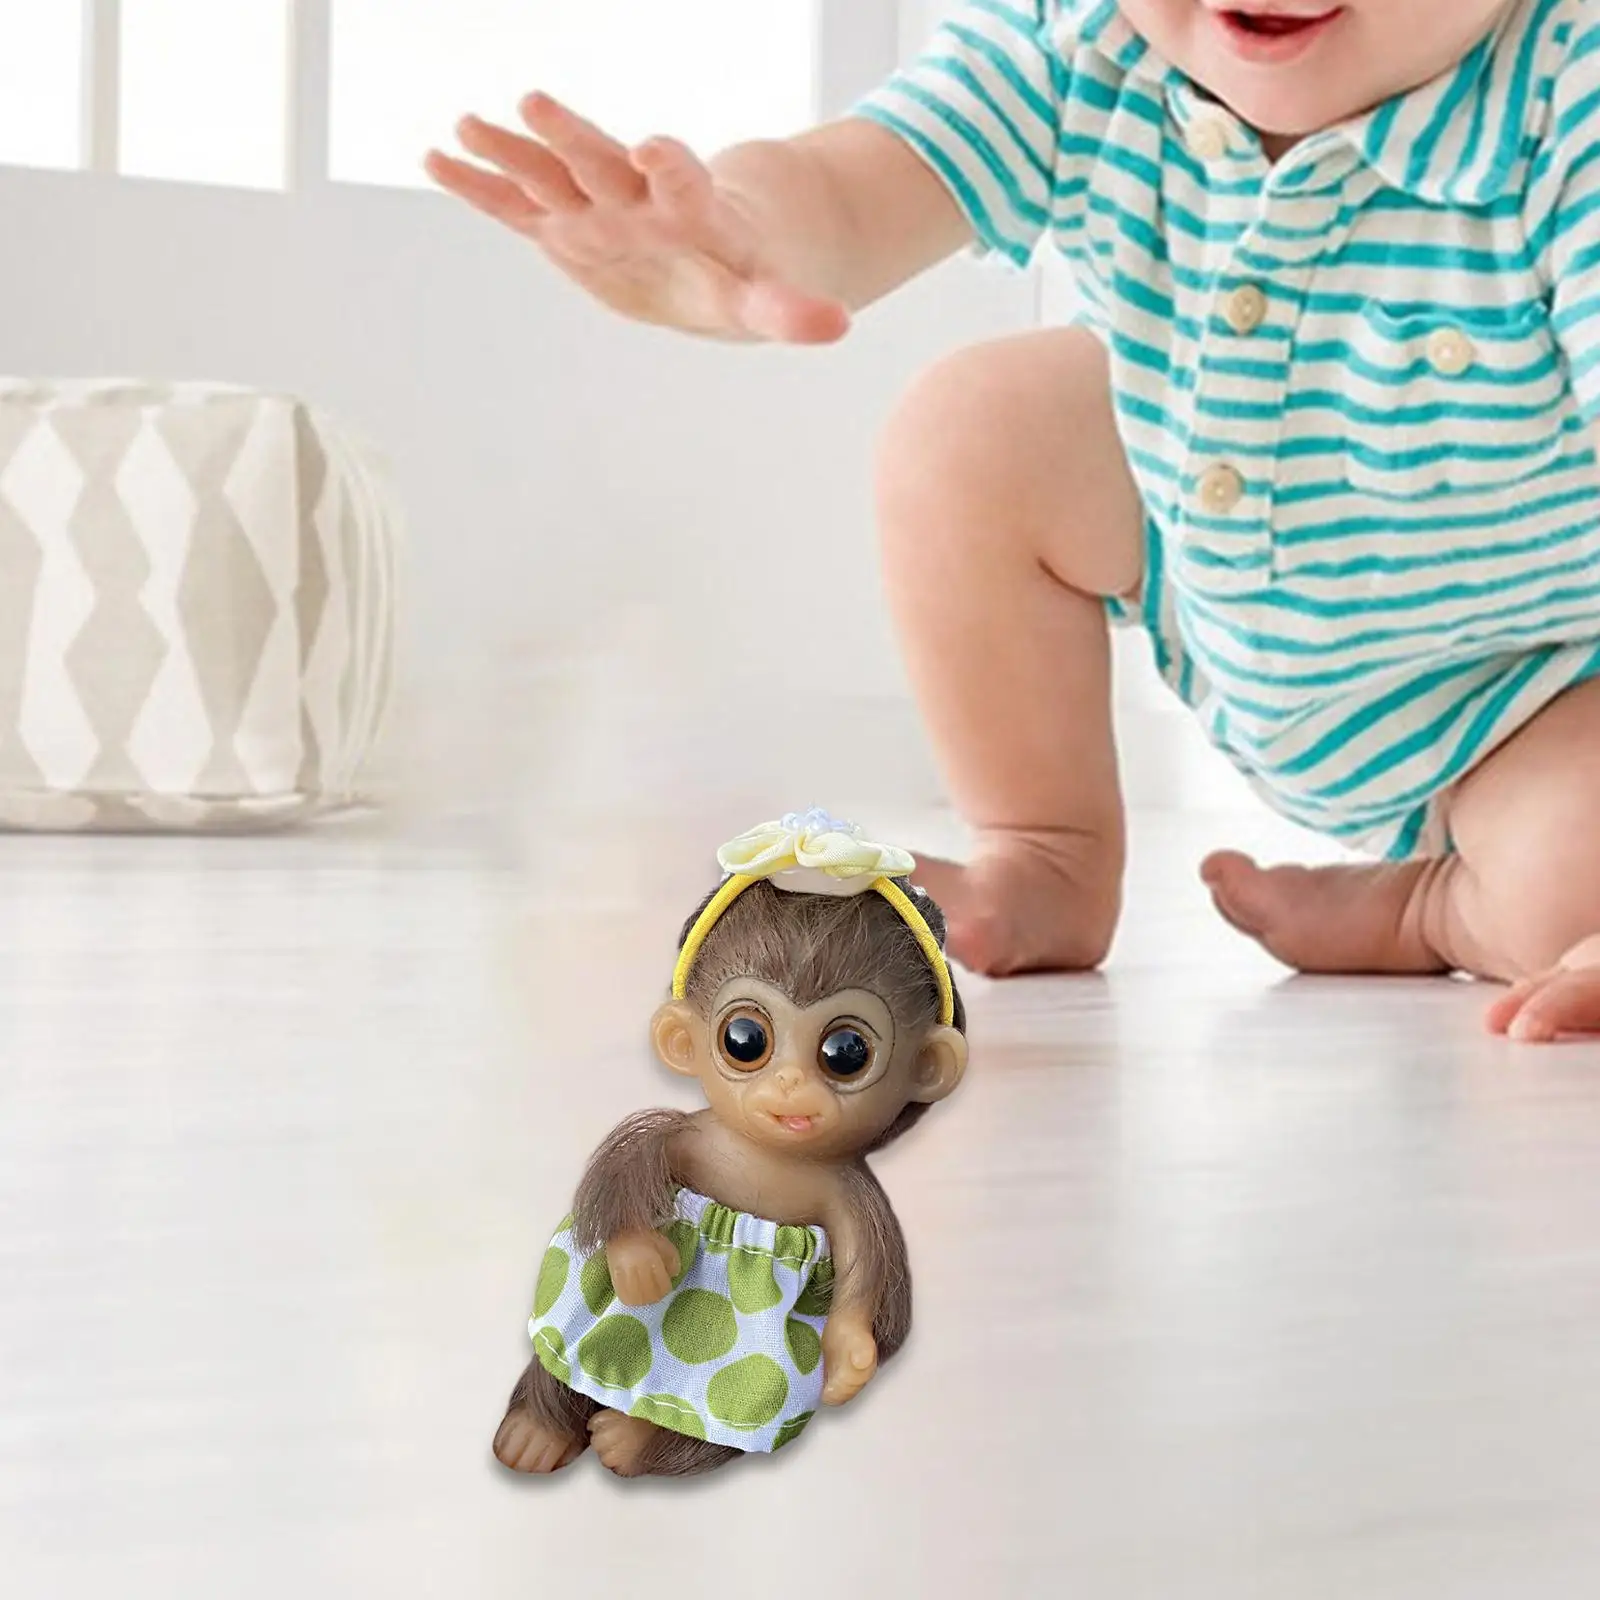 6in Full Body Silicone Monkey Home Decoration Soft Toys Baby Doll Waterproof for Girls Boys Children Kids Toddlers Gifts